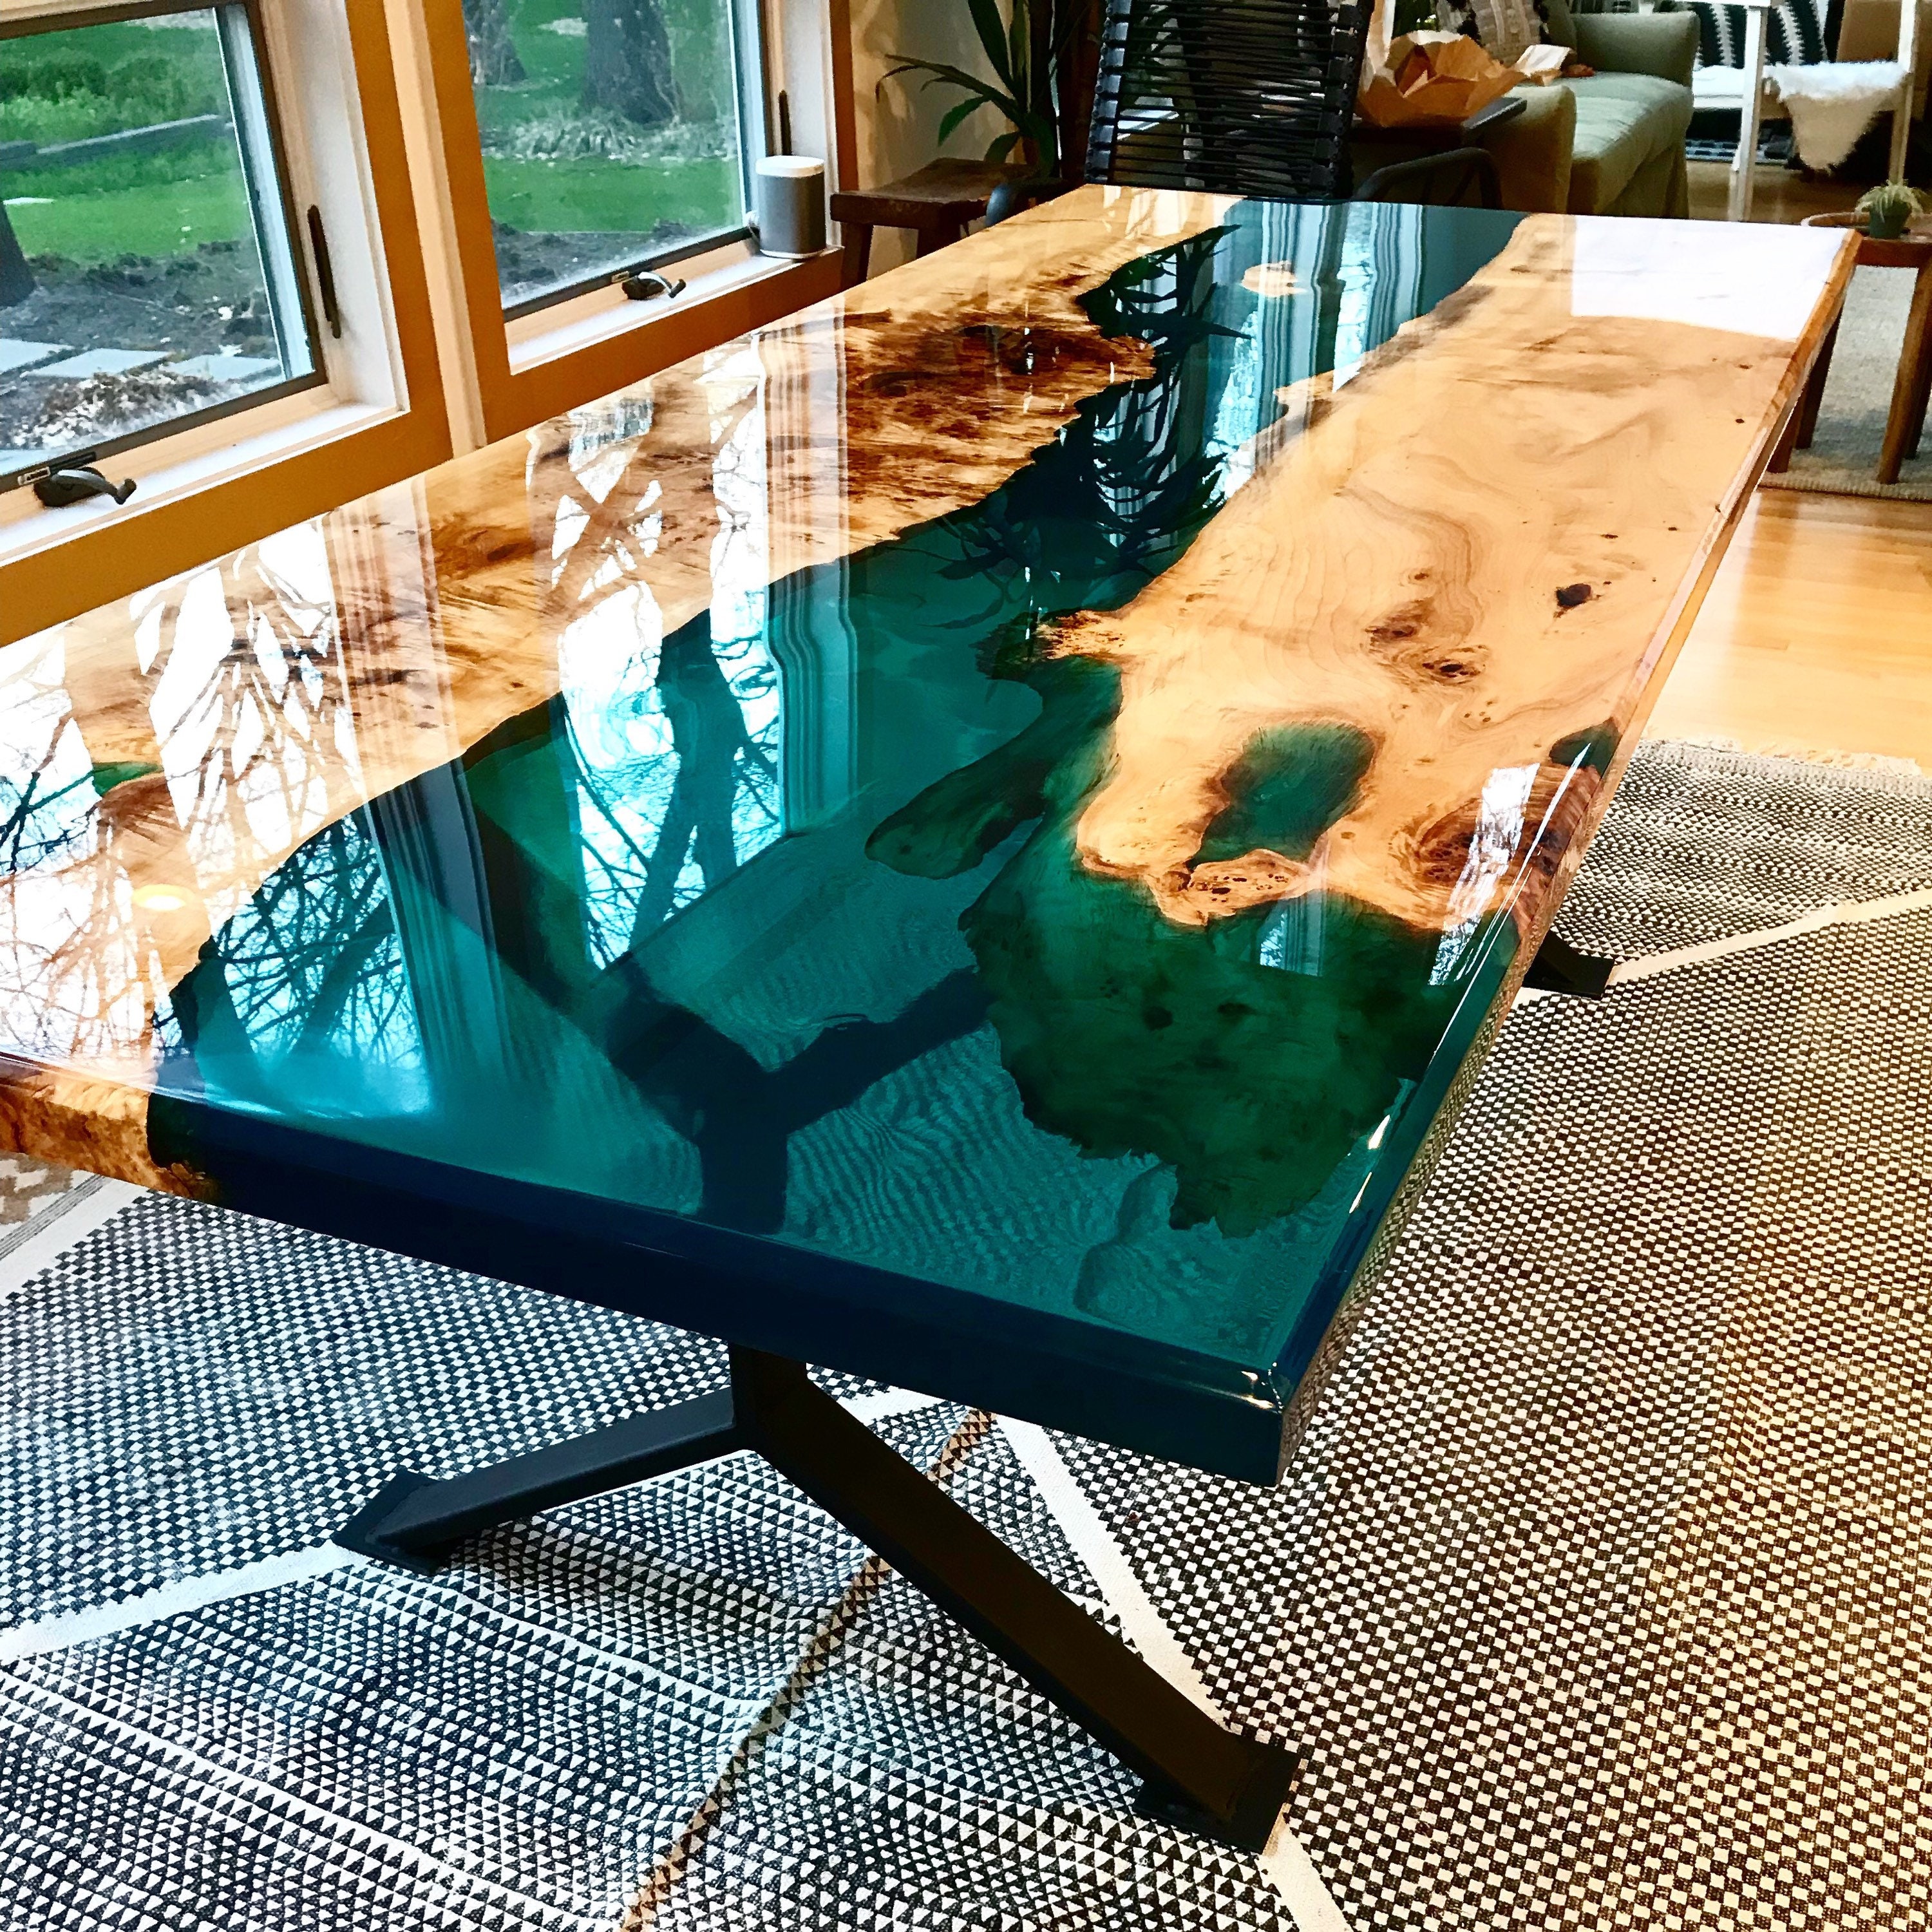 BLUE EPOXY RESIN RIVER DINING FURNITURE , ADORABLE GIFTS HOME DECOR , TABLE  TOP